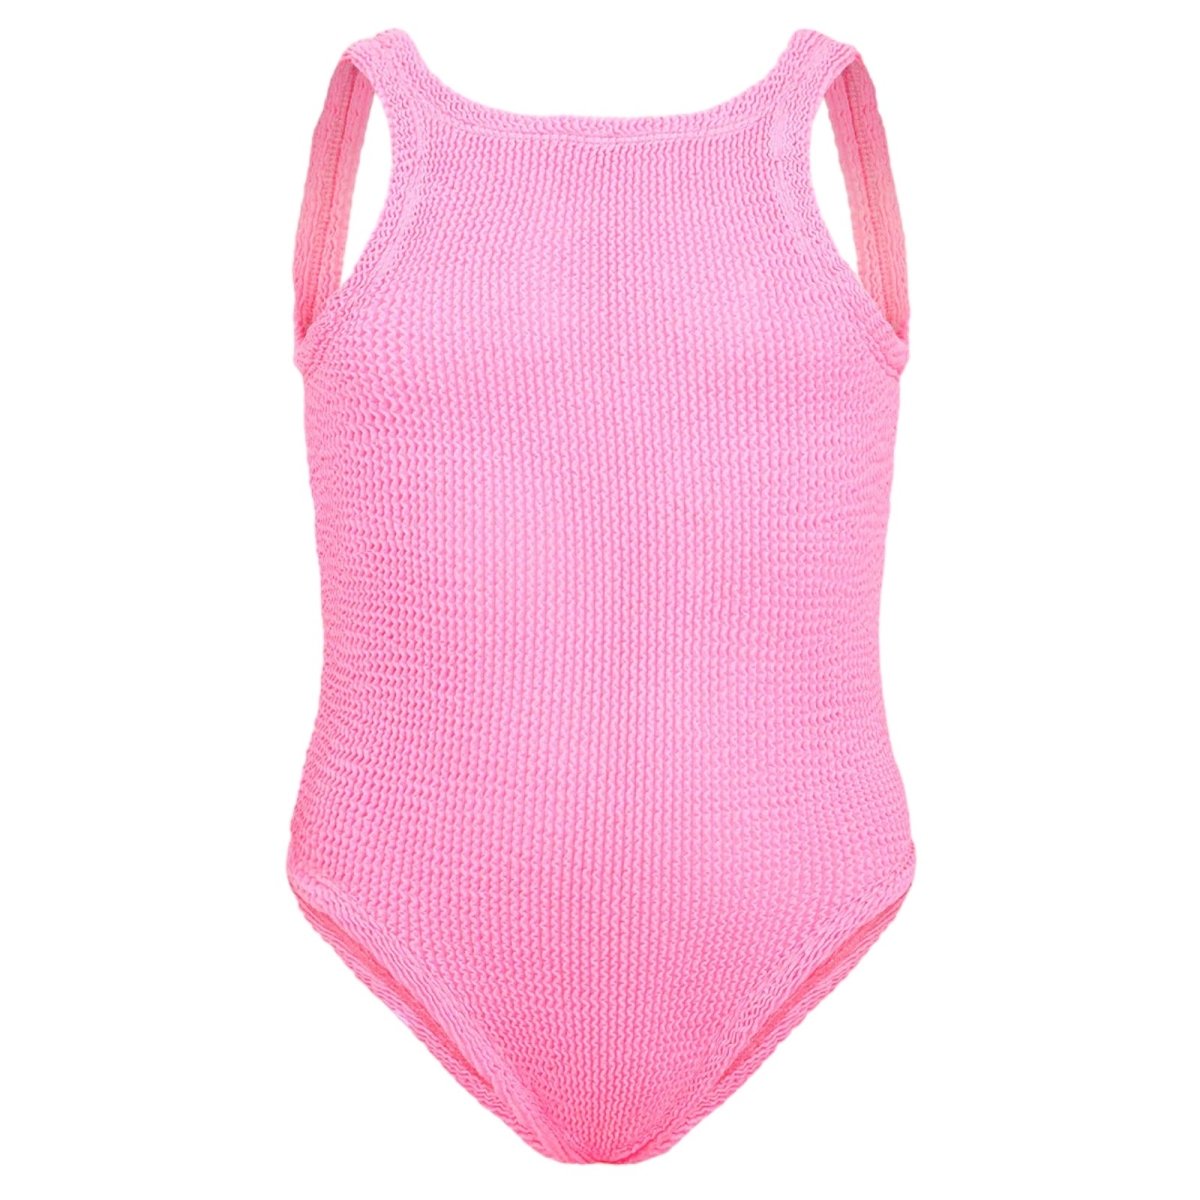 BUBBLEGUM CLASSIC CRINKLED ONE PIECE SWIMSUIT (PREORDER) - HUNZA G KIDS